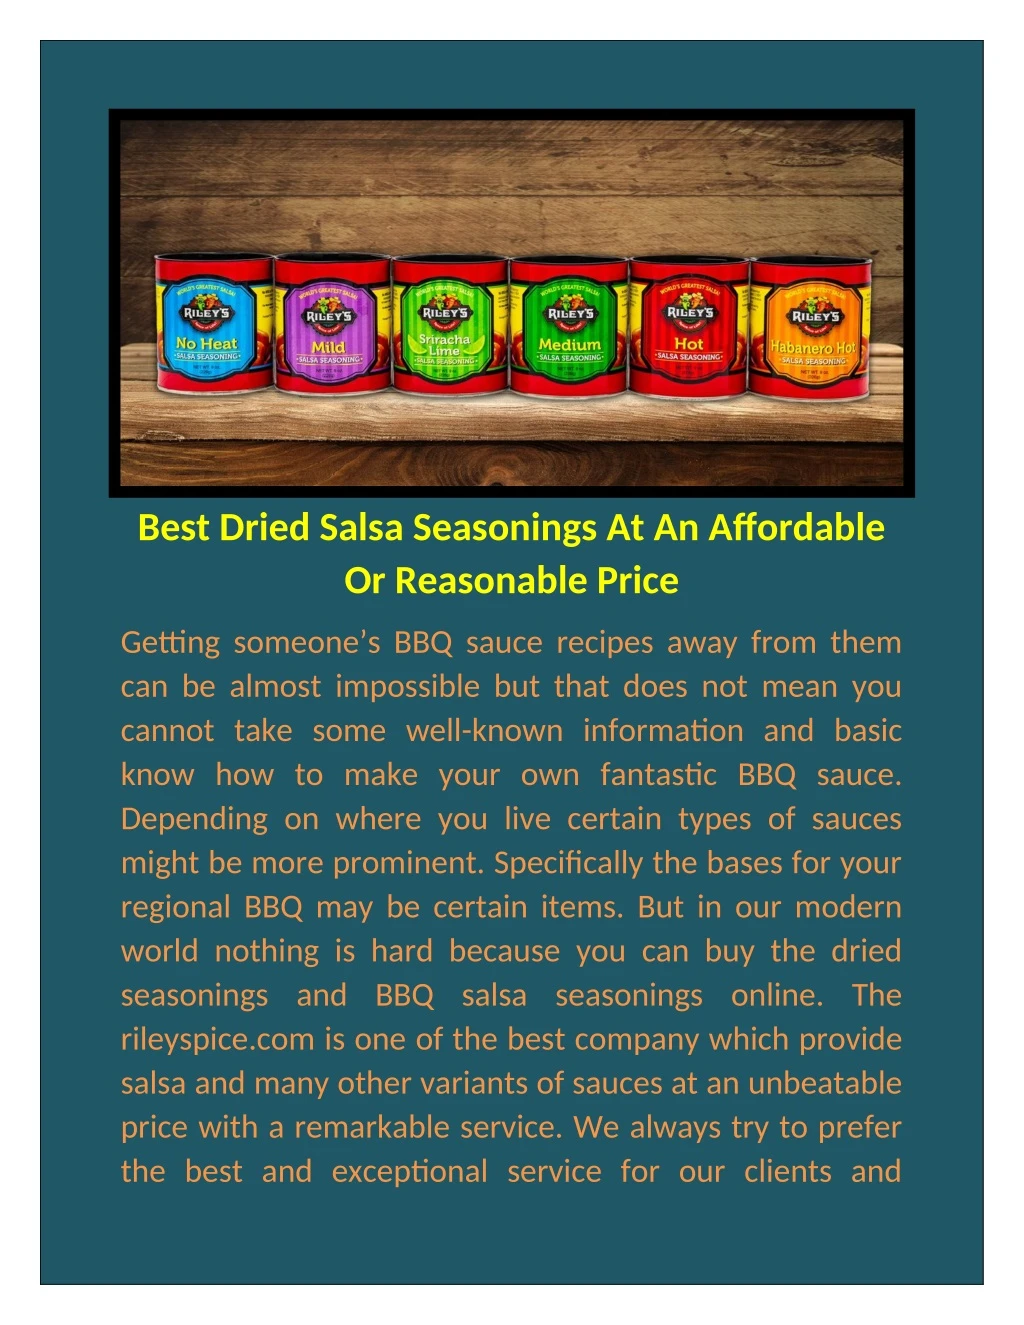 best dried salsa seasonings at an affordable